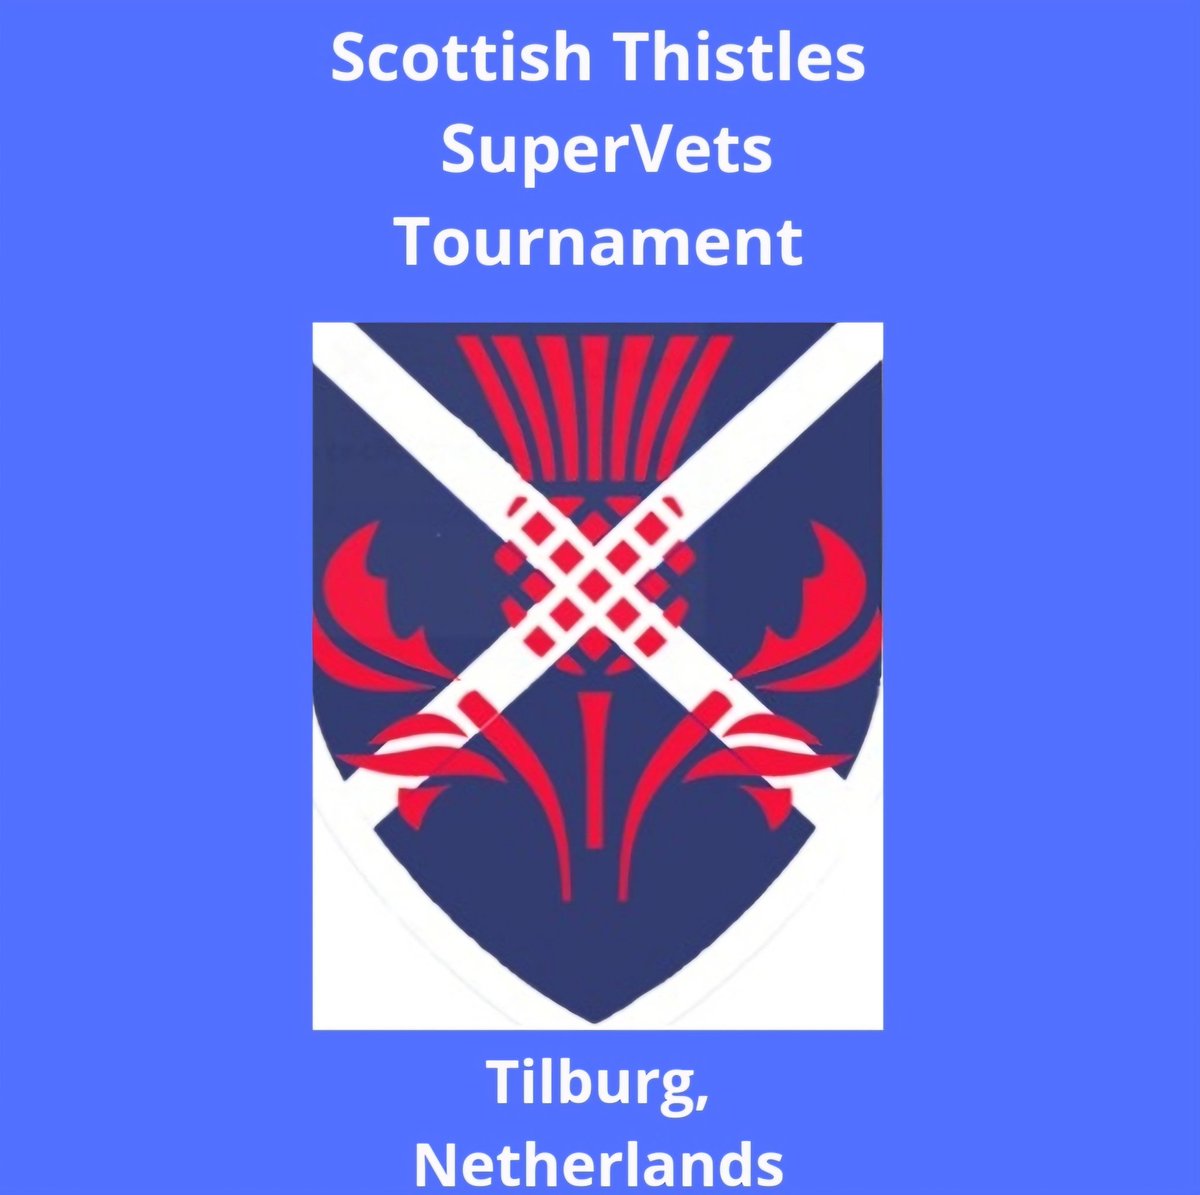 We bid the Scottish Thistles Hockey Club ' Au Revoir' as they travel to the Netherlands to take part in the 7th International Super Veterans Hockey Tournament in Tilburg this weekend.
There are 4 Scottish Thistles teams heading to one of the most popular tournaments in Europe.